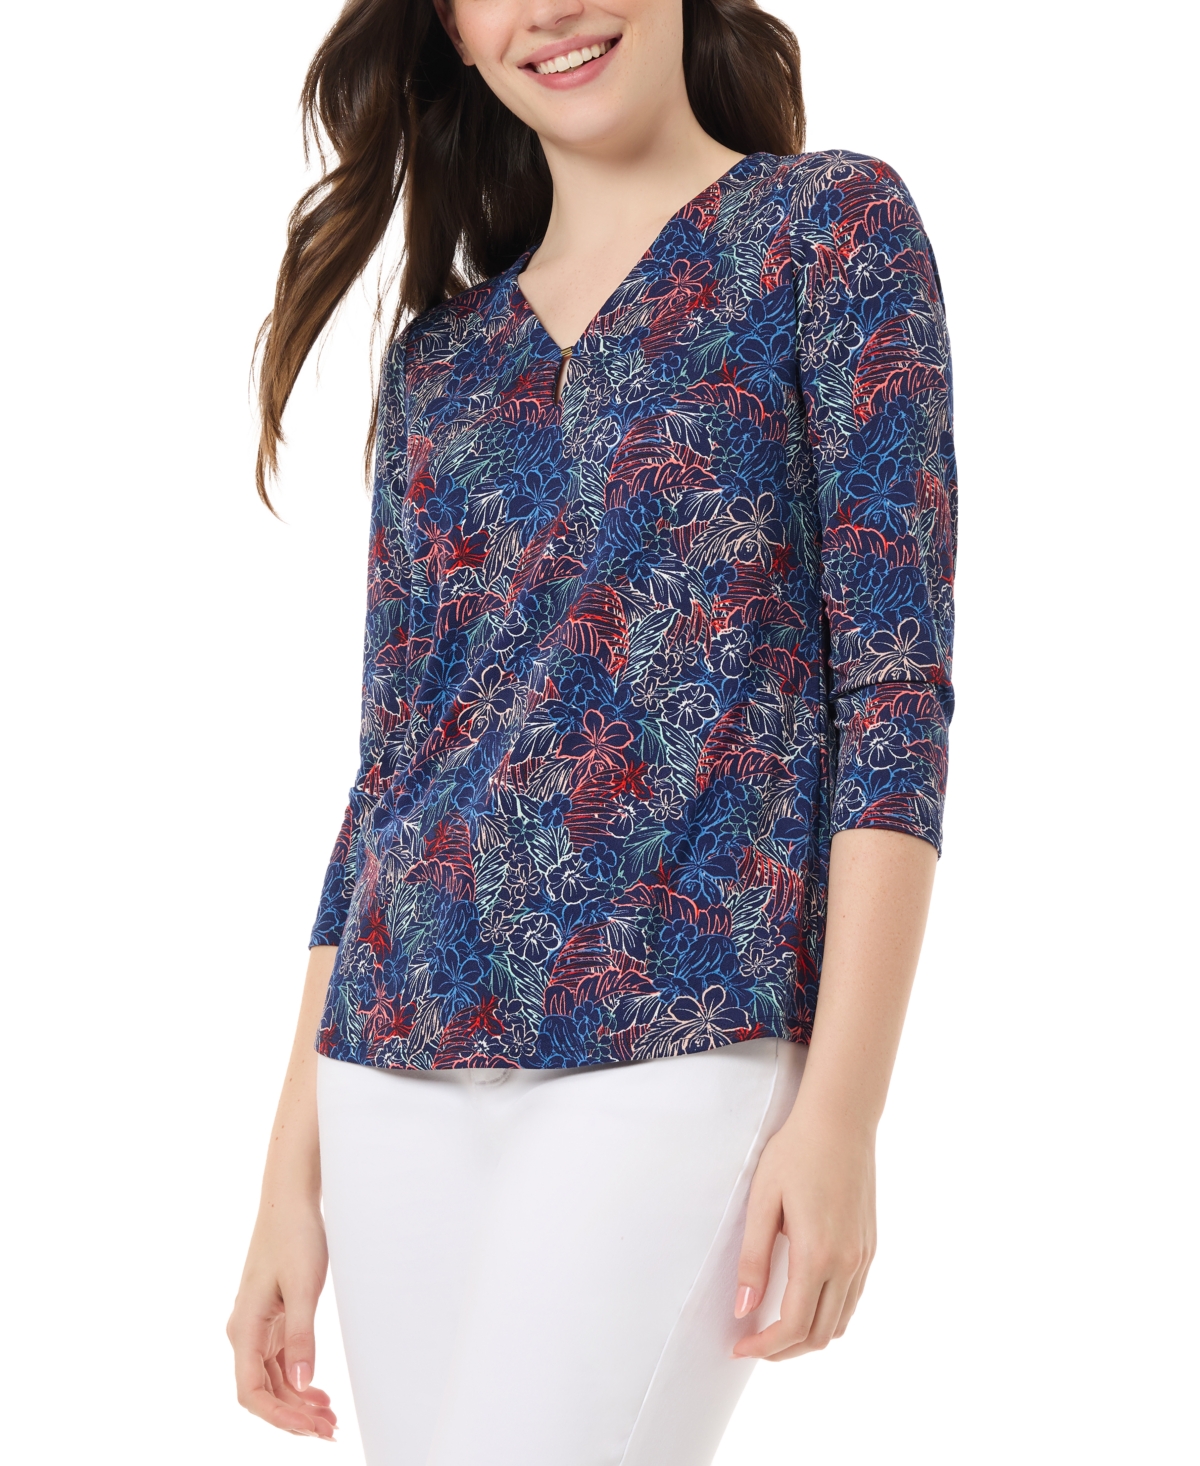 Women's Printed Moss Crepe V-Neck Top - Pacific Navy